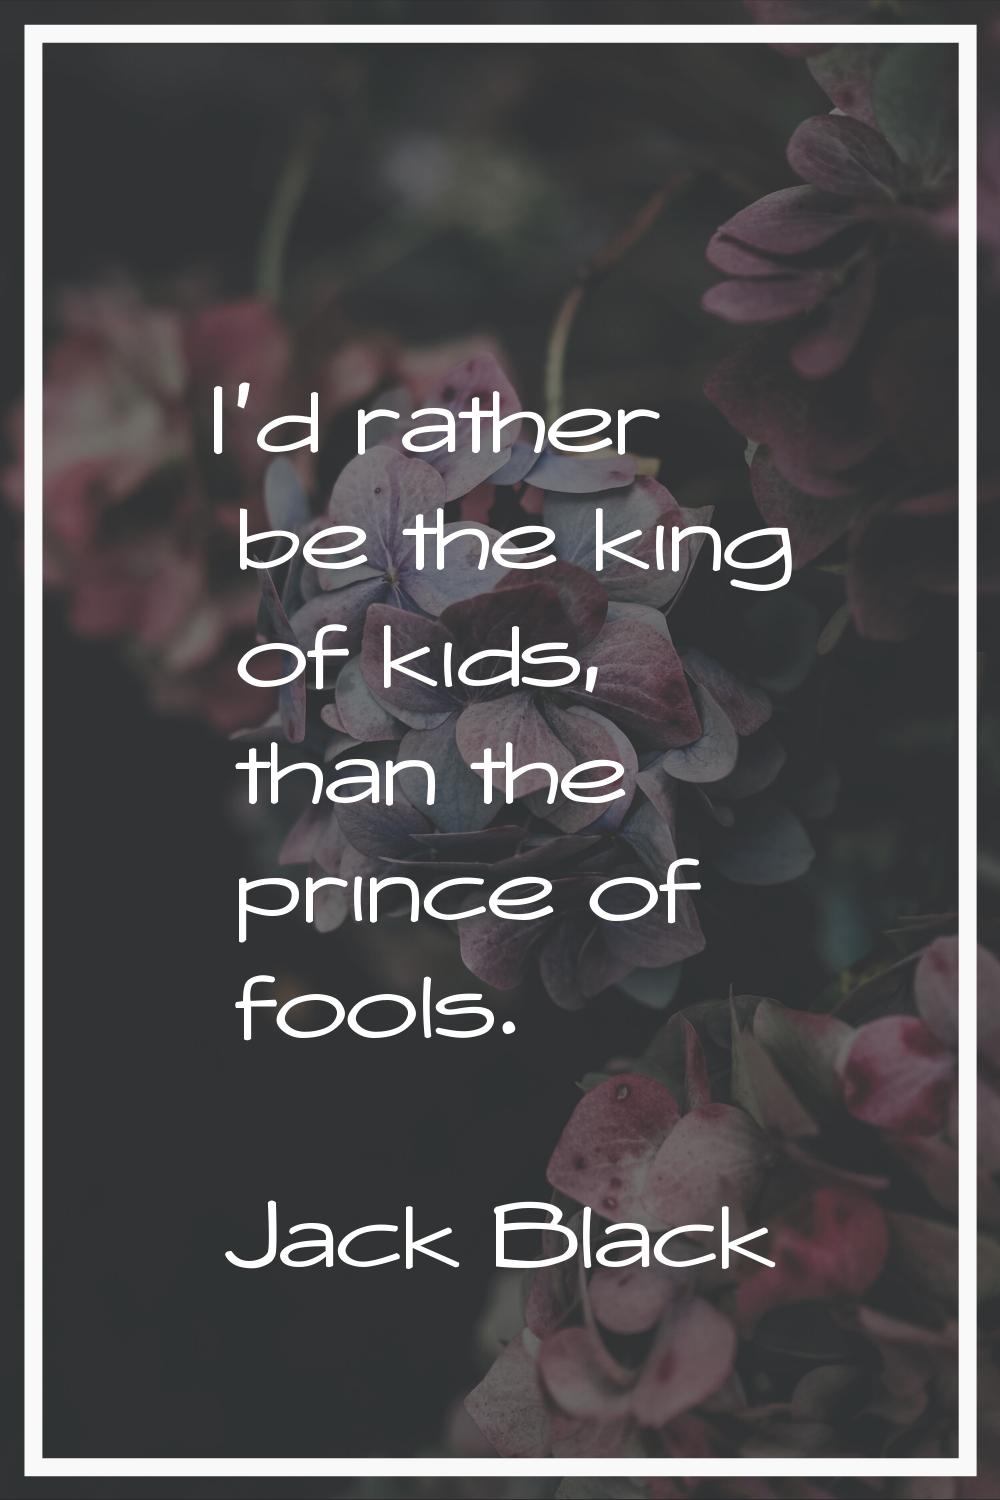 I'd rather be the king of kids, than the prince of fools.